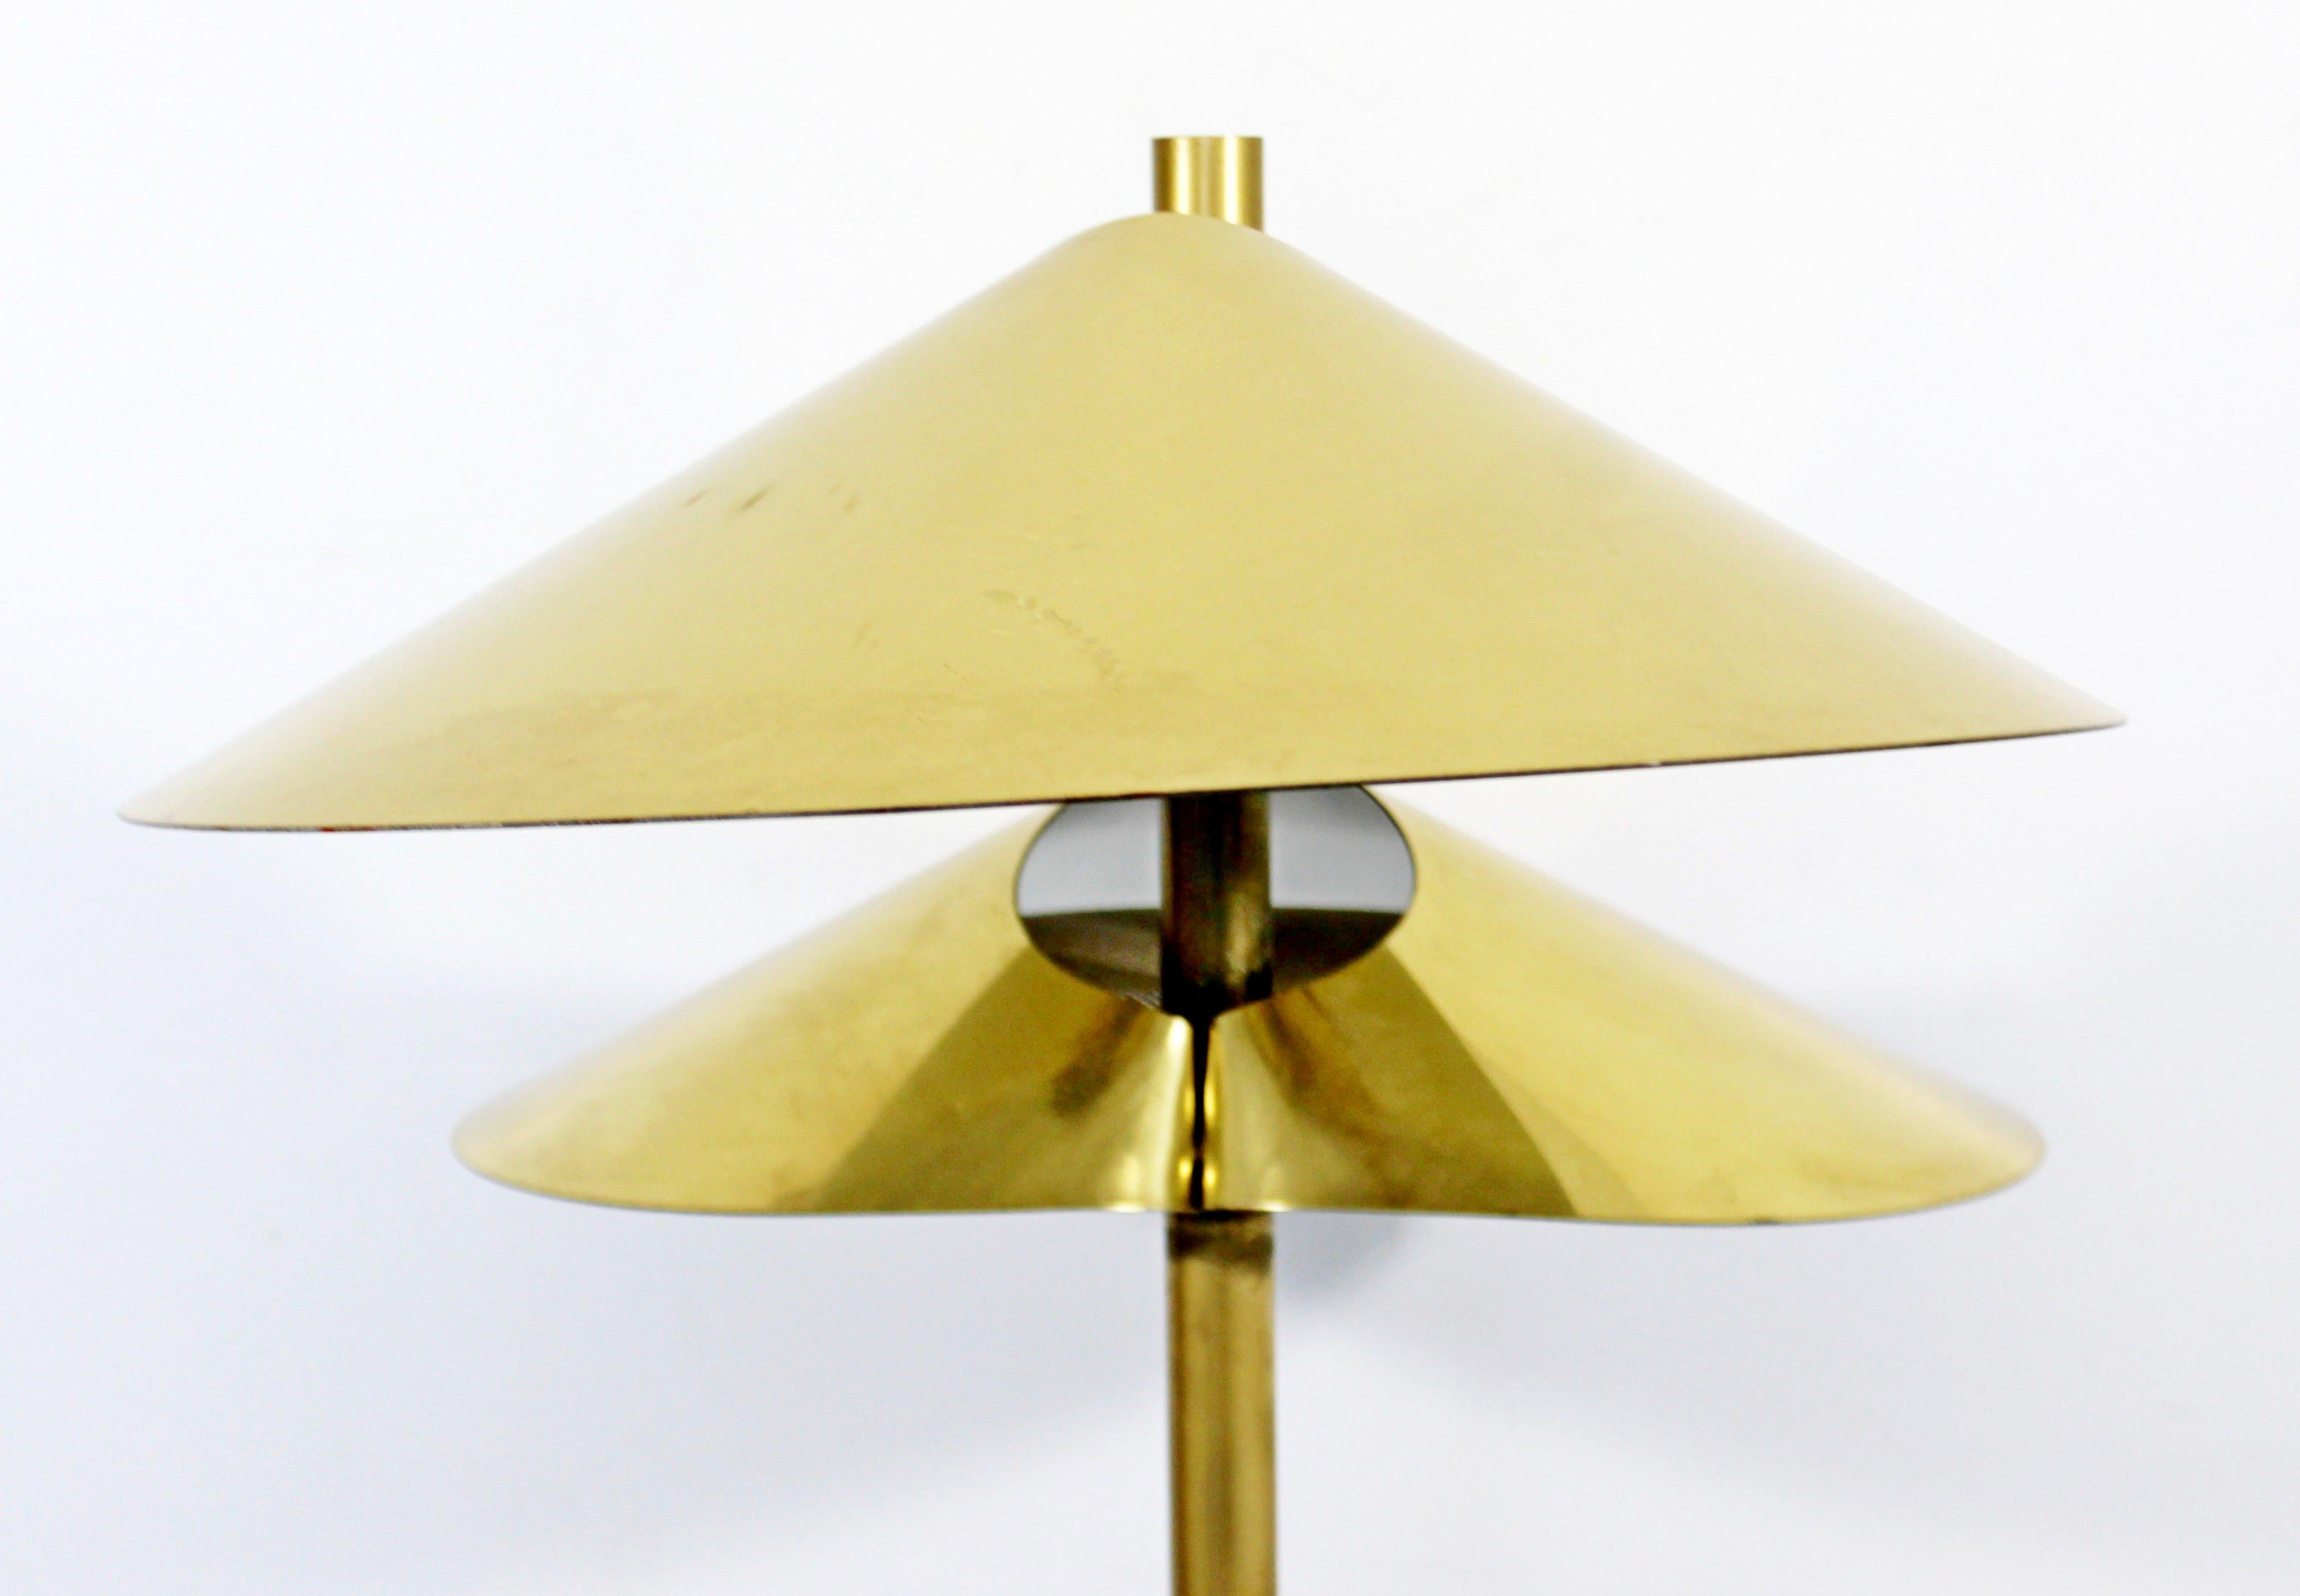 Late 20th Century Mid-Century Modern Rare Jere Brass Lily Pad Petal Floor Lamp Signed, Dated 1977